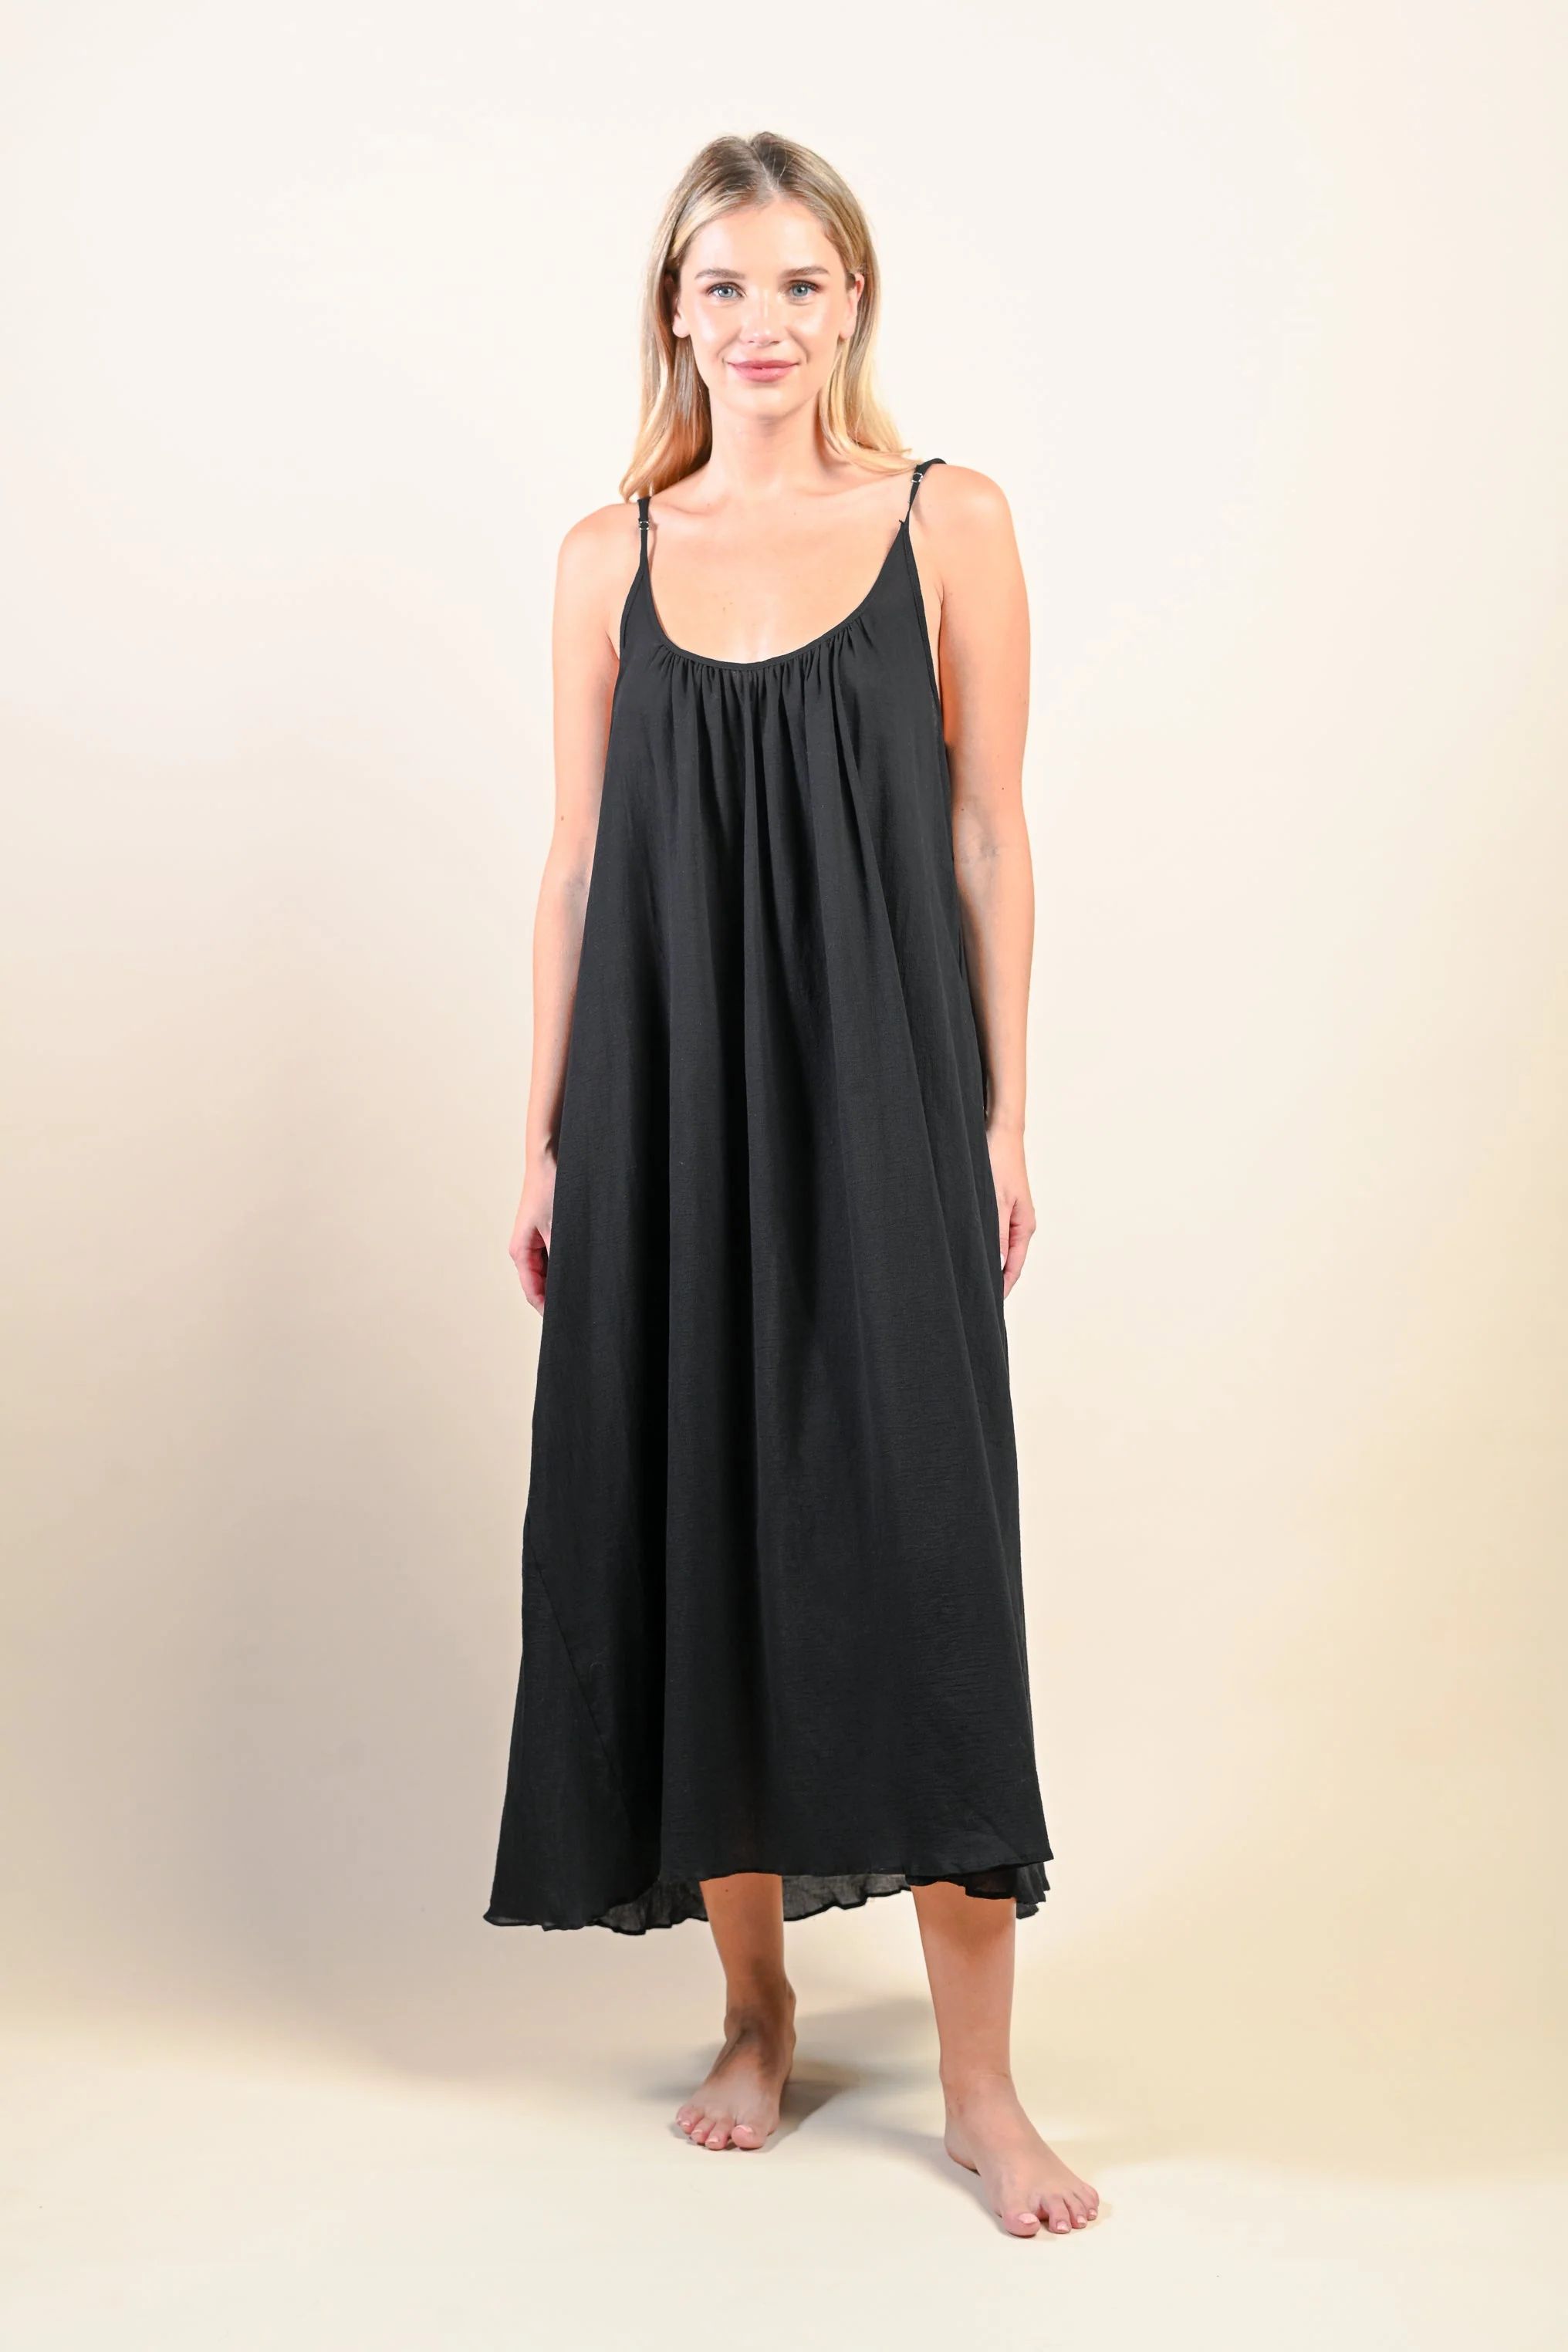 Malfi Dress by Sitano | Support HerStory